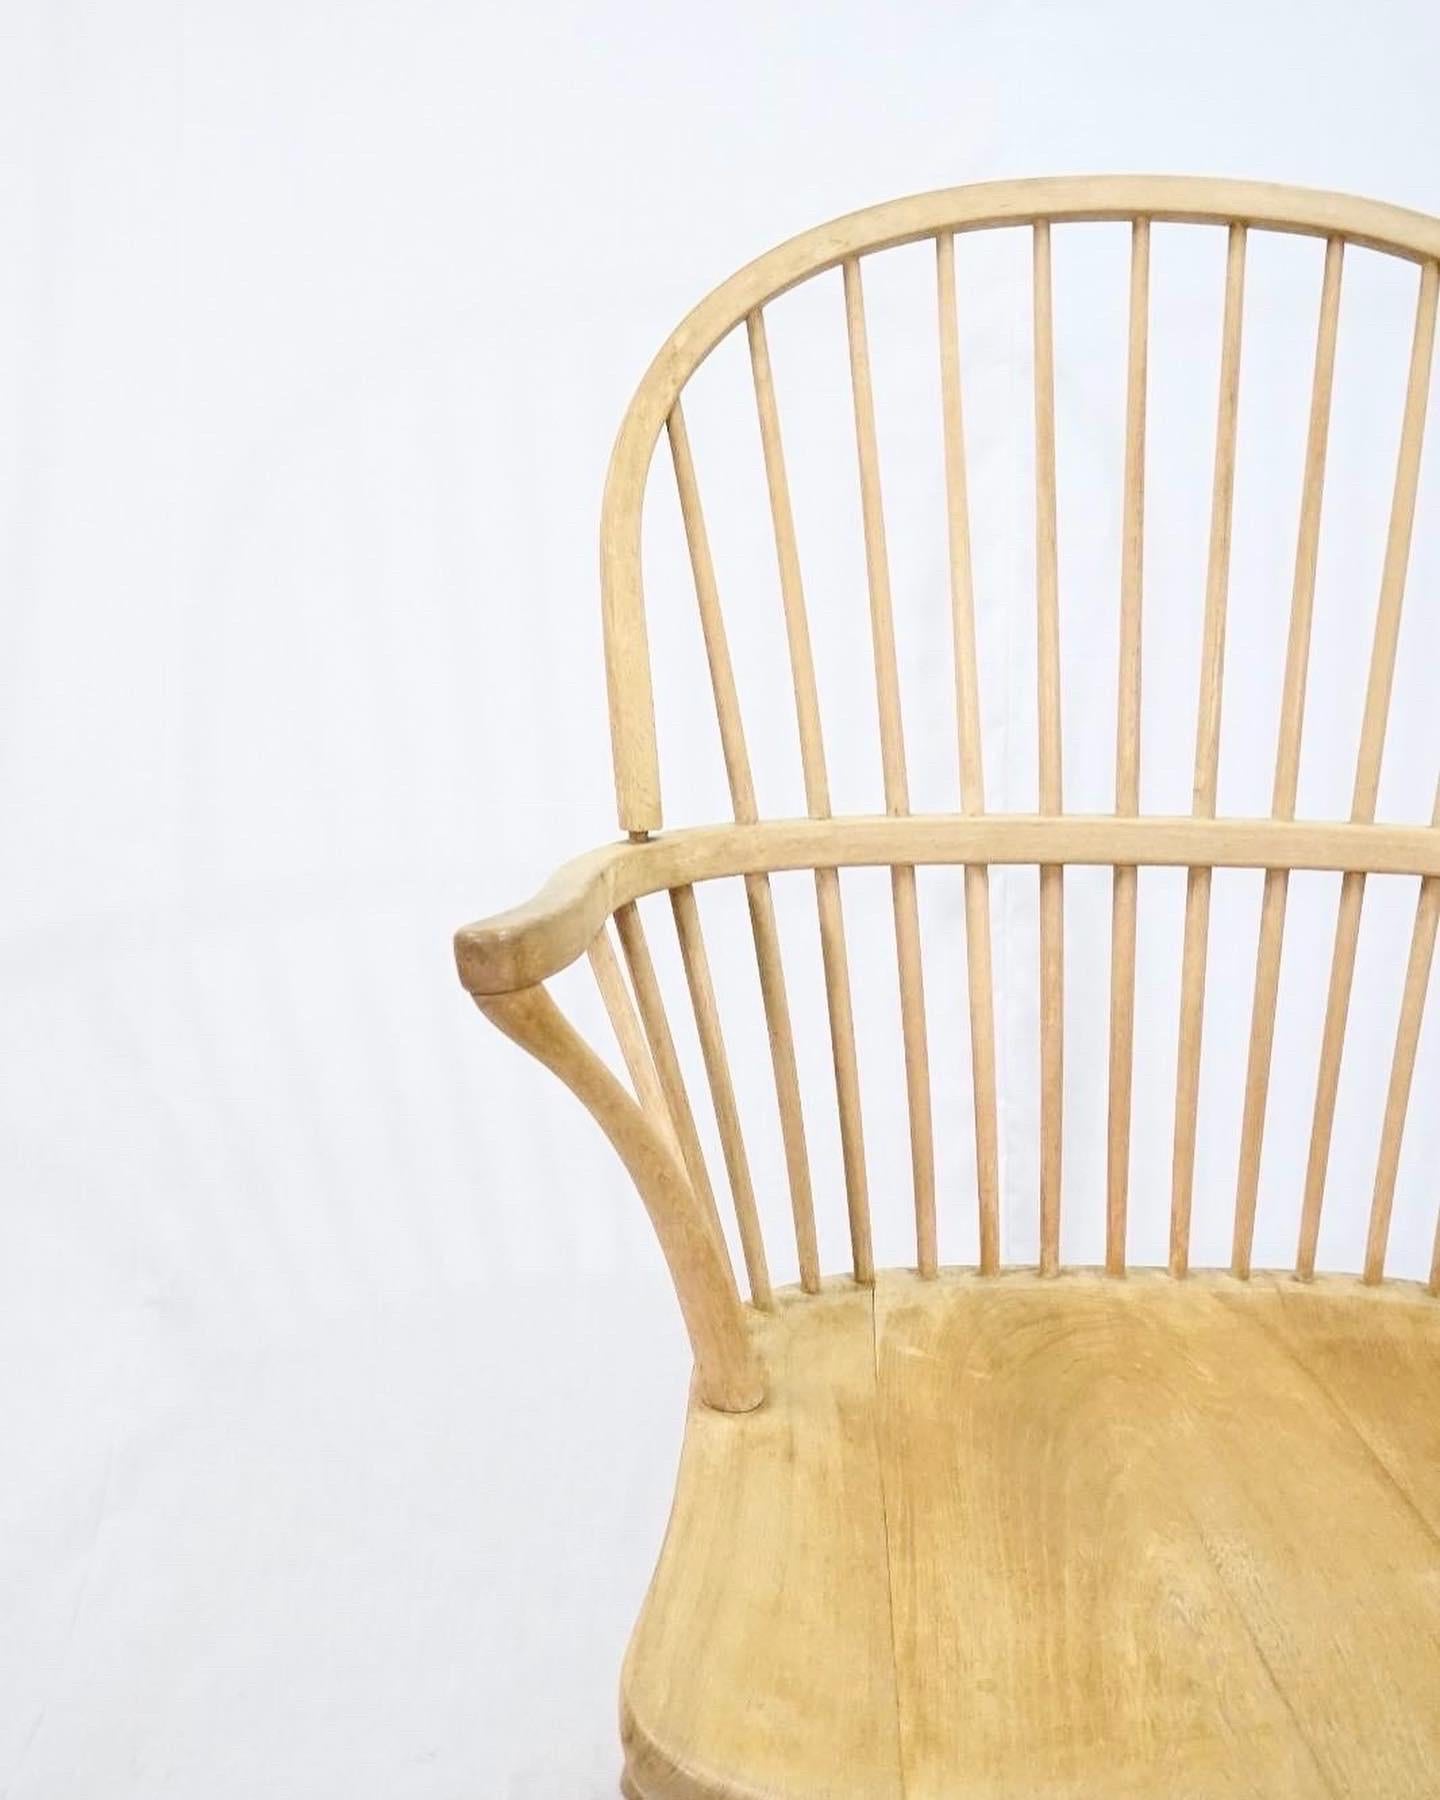 Rare Palle Suenson windsor chair in solid beech wood produced by Fritz Hansen in the 1940’s. 
The chair is made in solid beech wood and includes a seat and backrest cushion with a wool fabric upholstery that has later been made by a professional